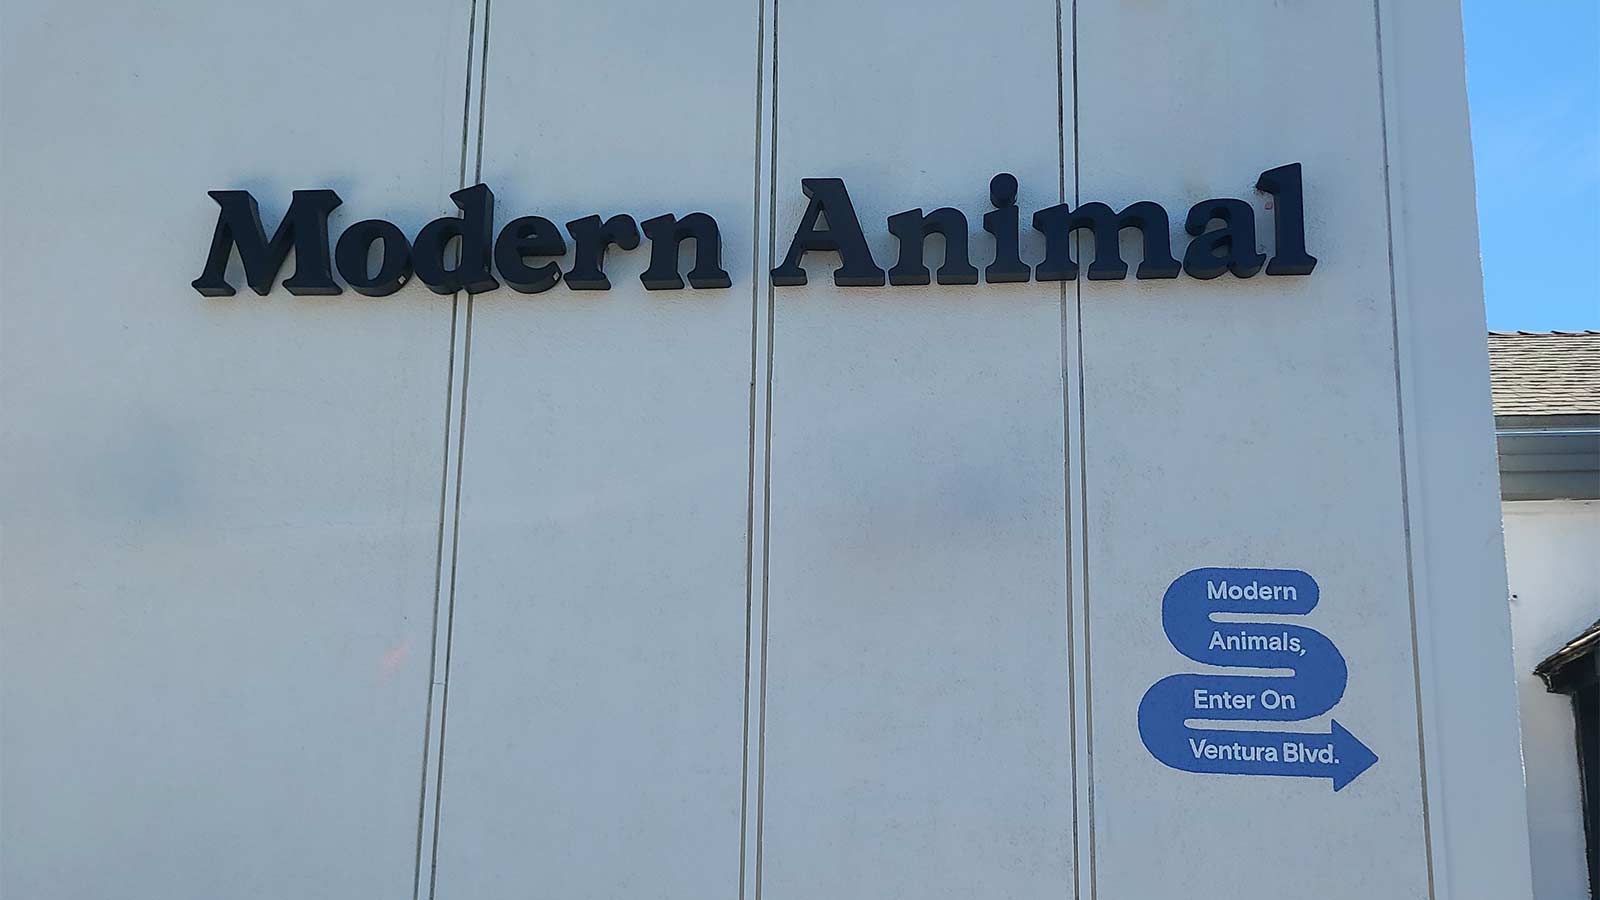 Modern Animal wall signs installed on the building